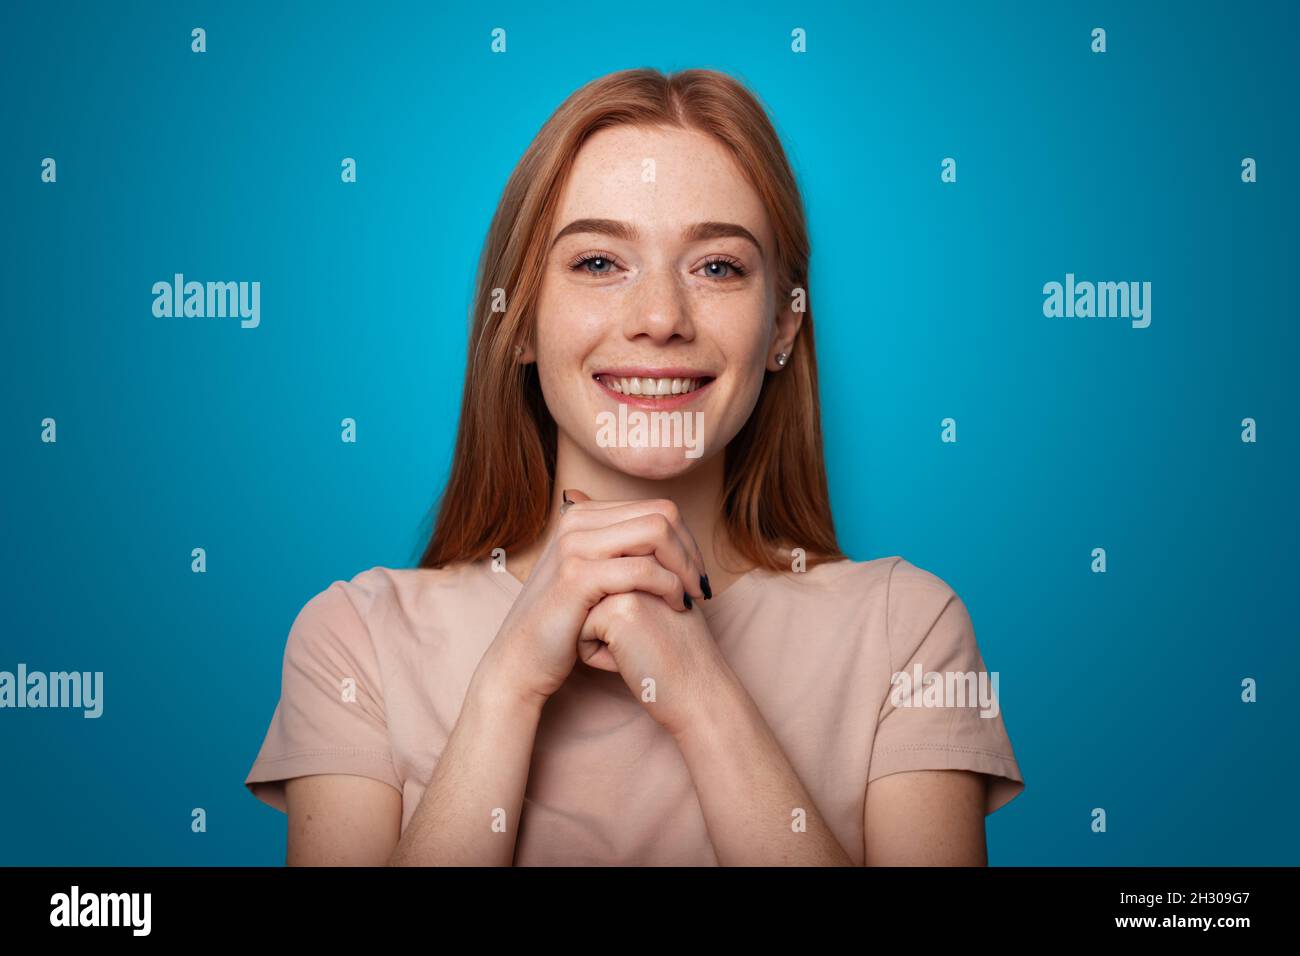 Caucasian young woman posing on a blue background. Smiling and looking at the camera with his hands under his chin. Freckled face Stock Photo